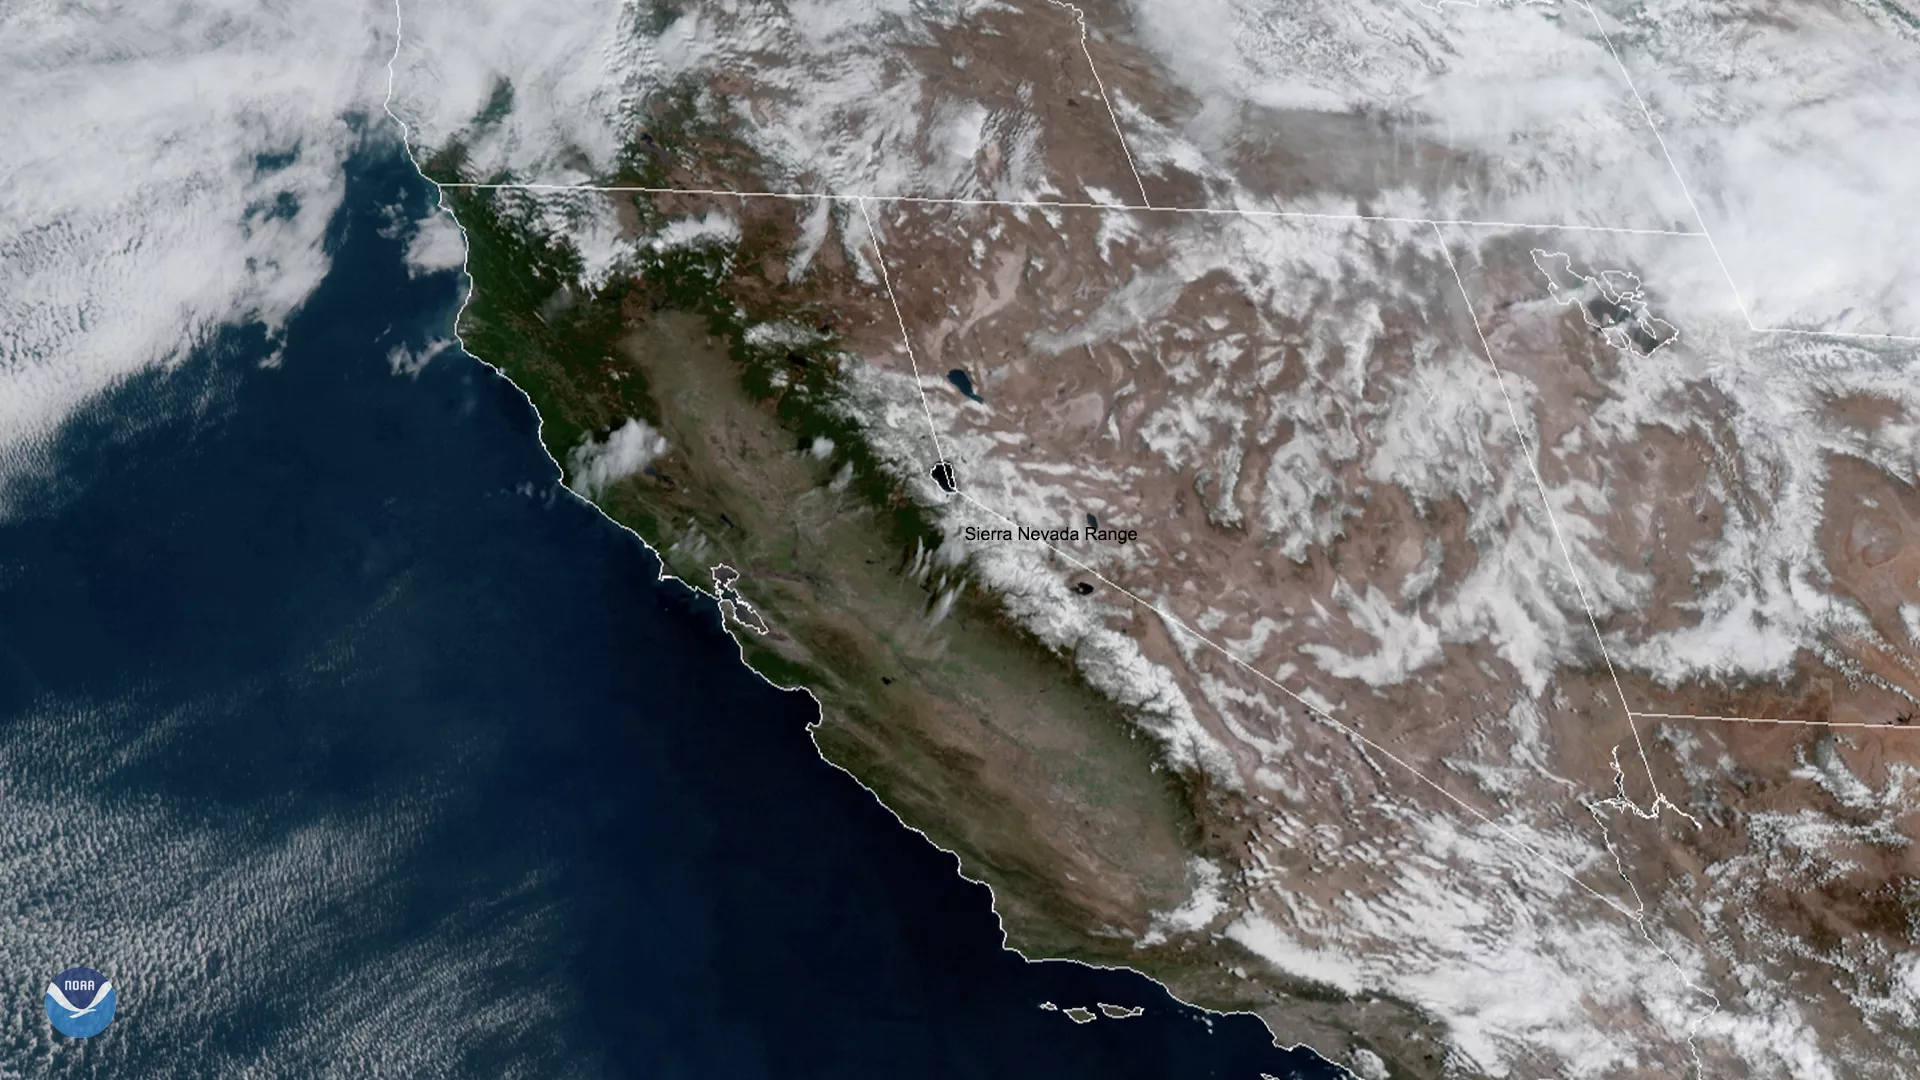 Image of california from space